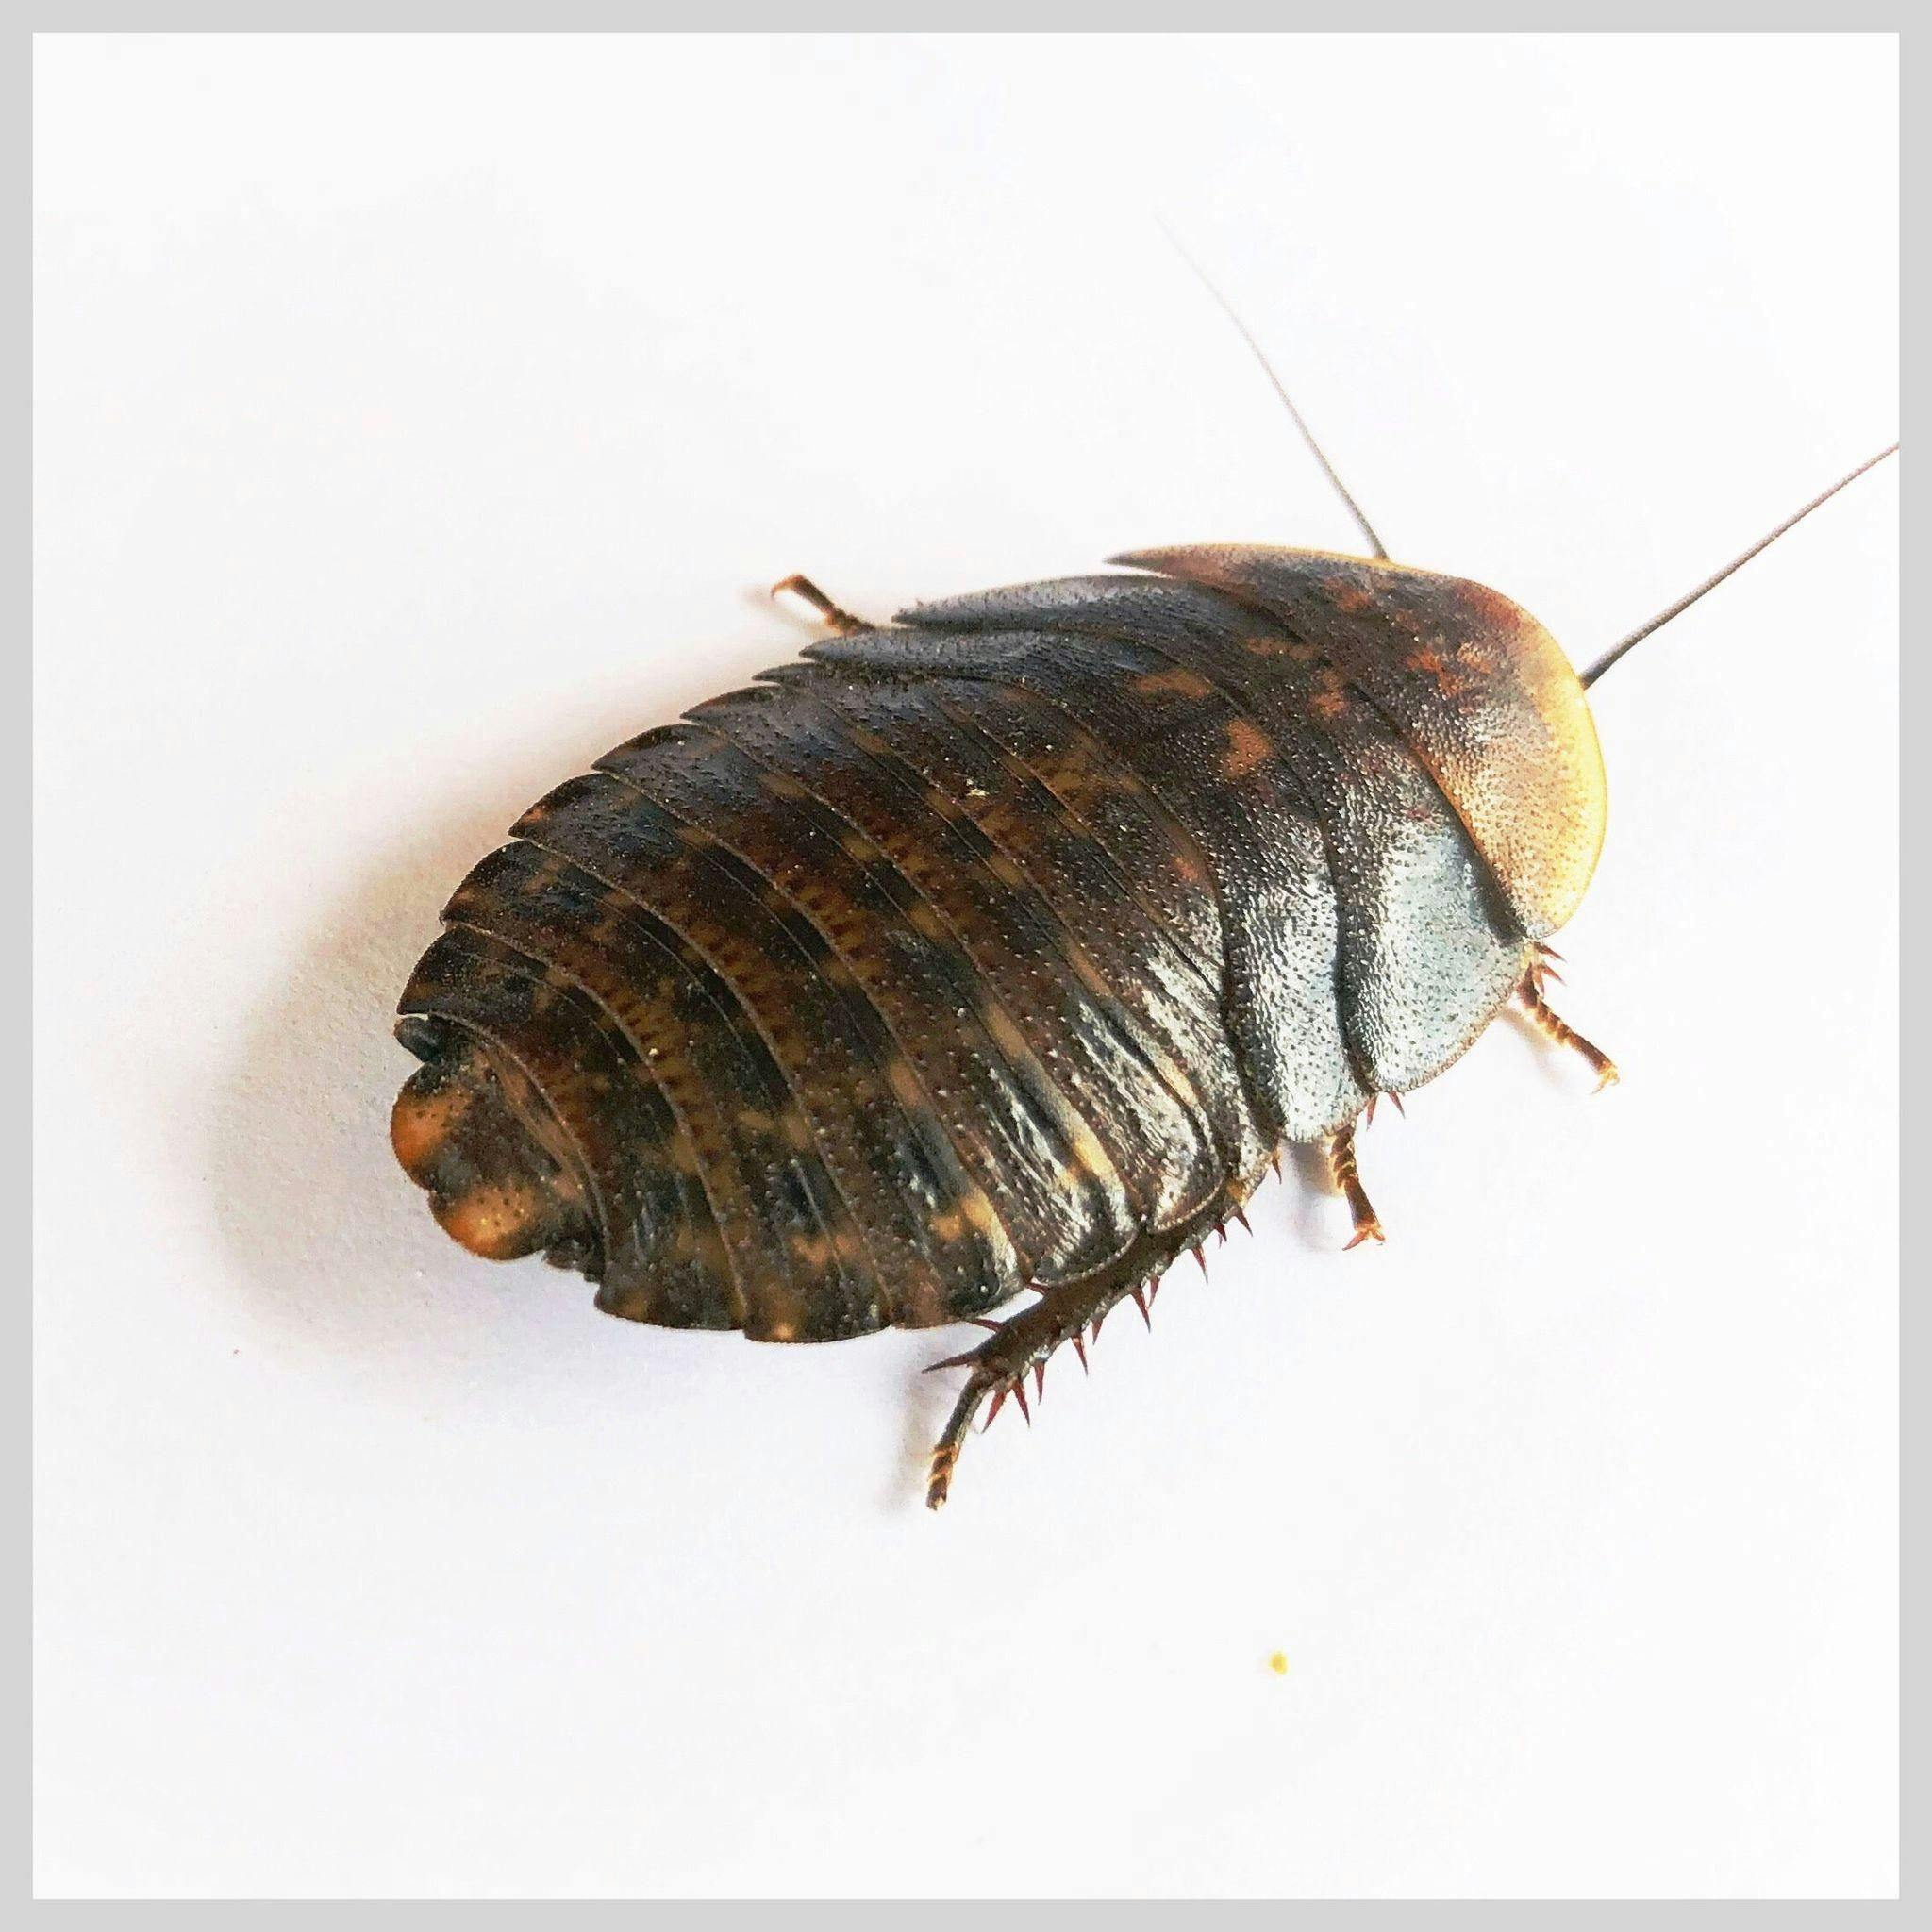 Image 1 for Extra Small (1/4-1/2") Discoid Roaches (25) by Ovipost